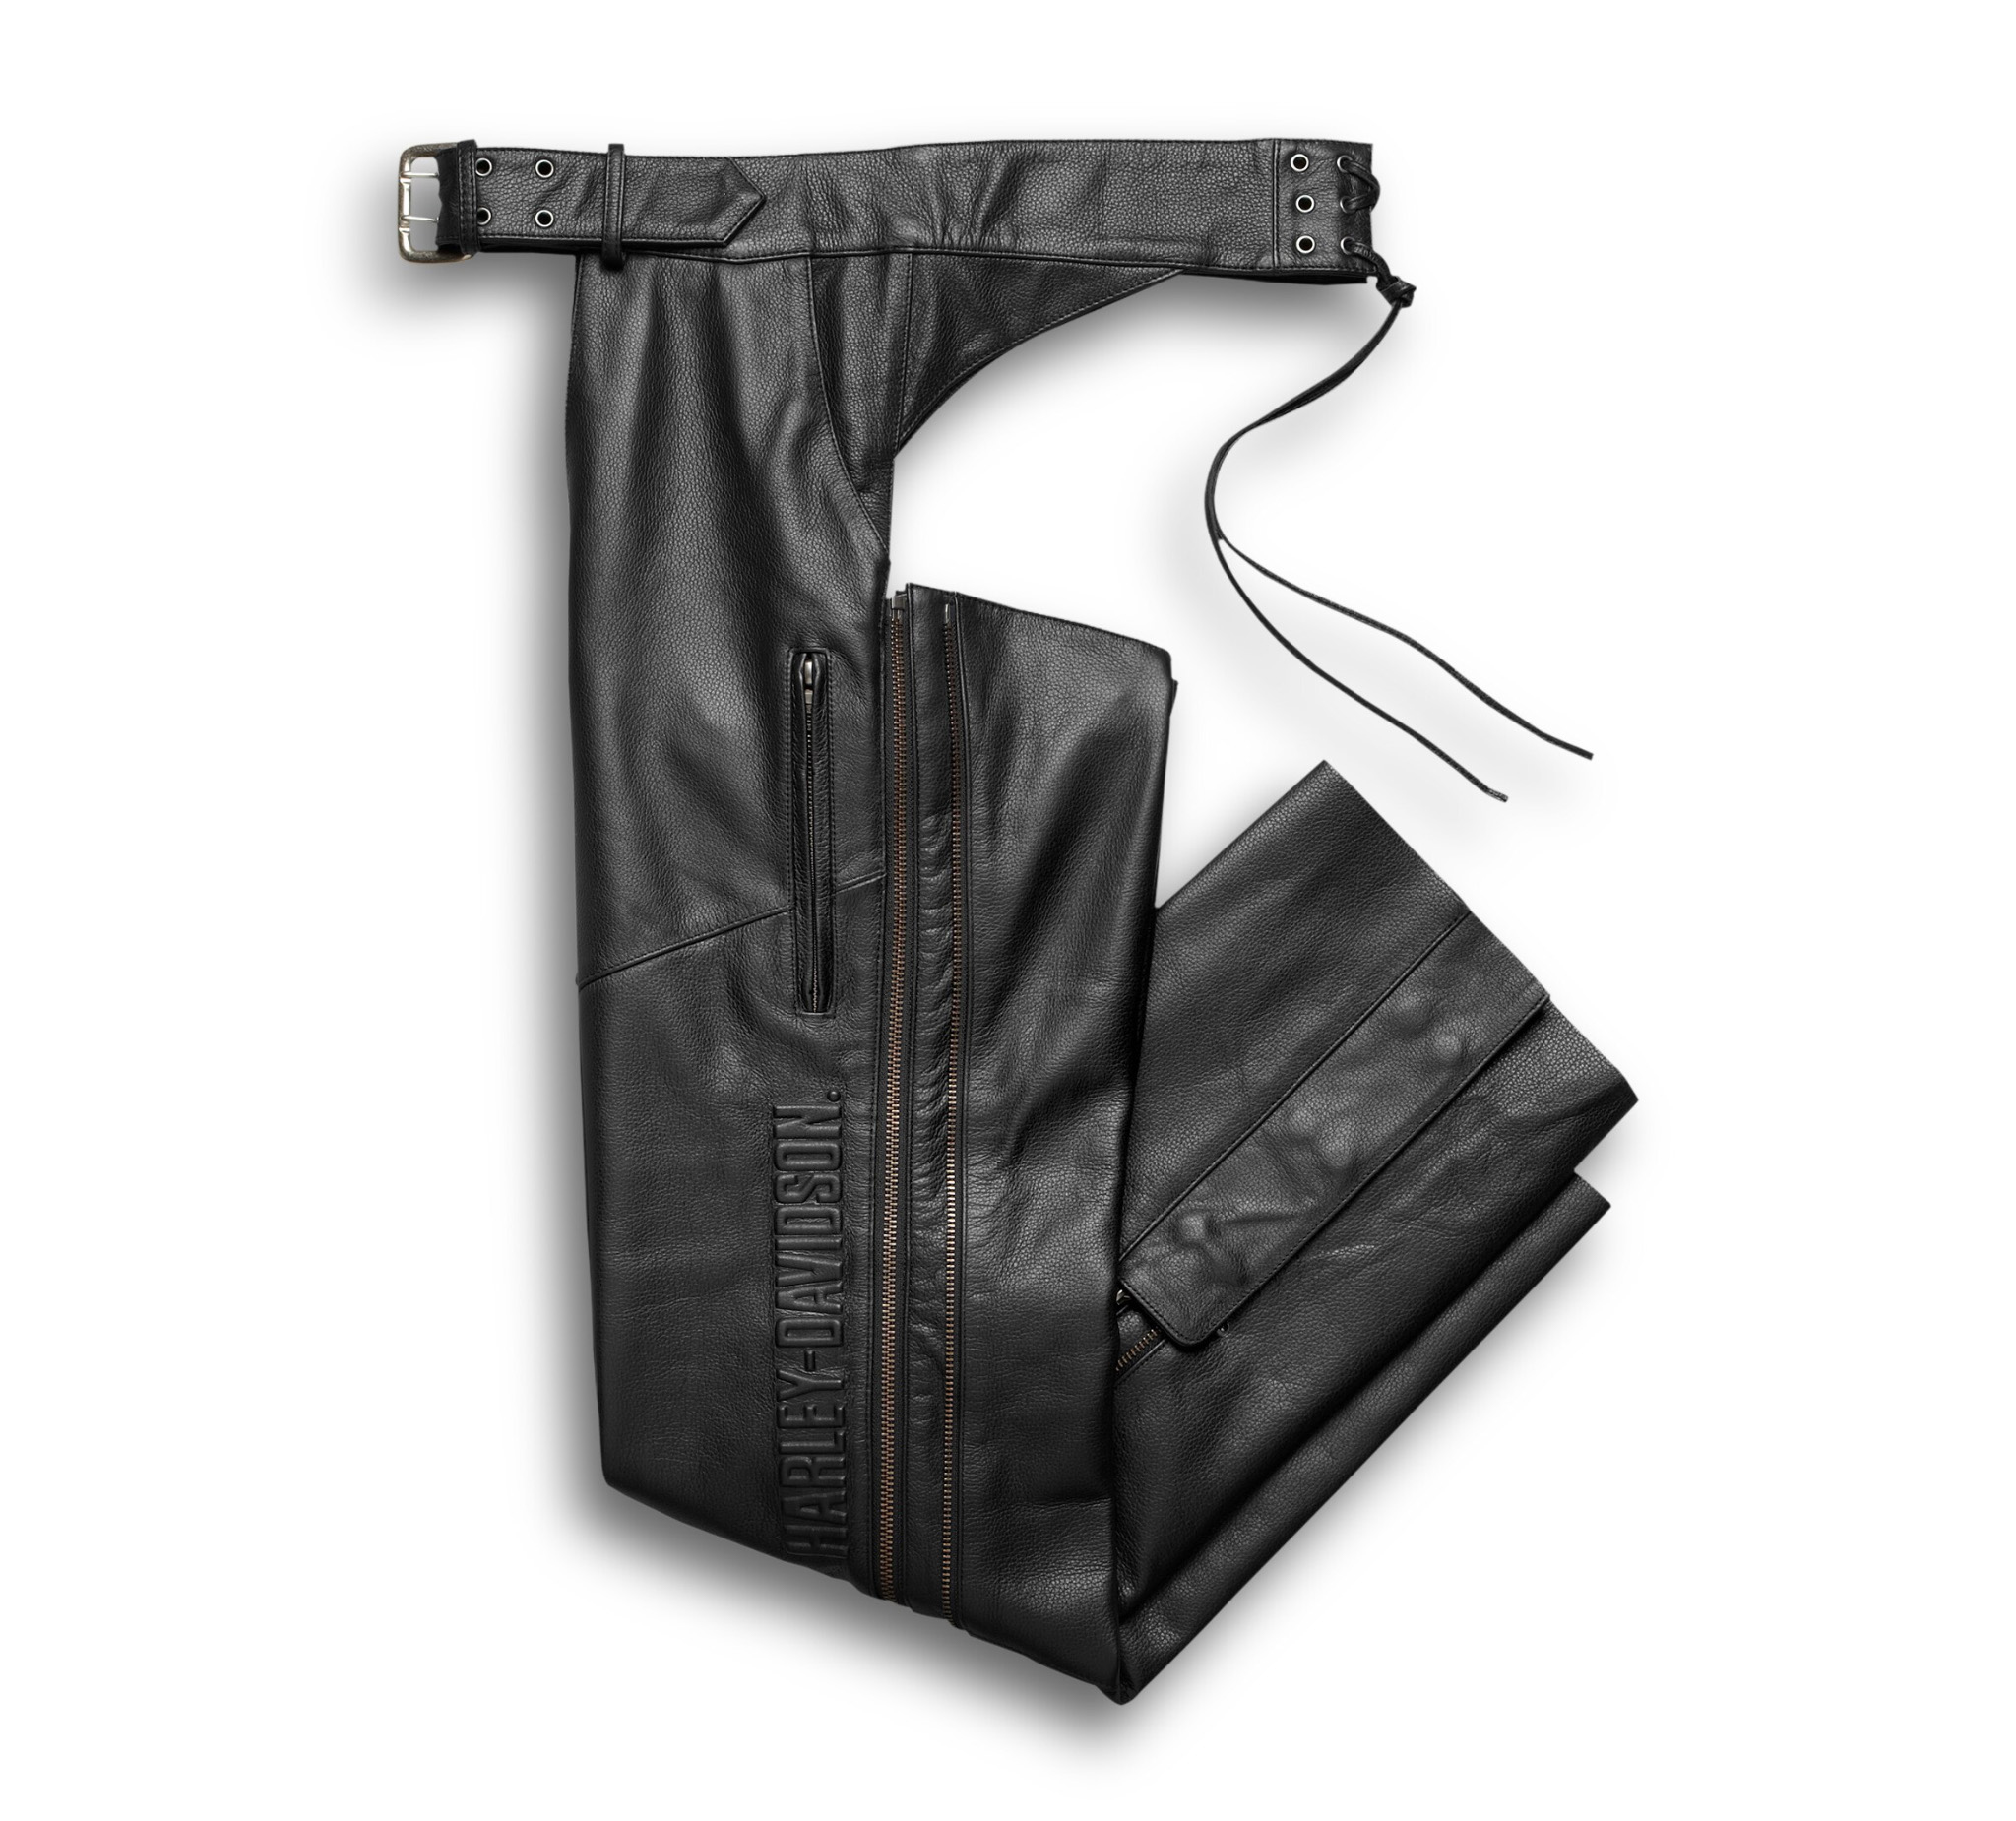 ARD CHAMPS ARD Black Motorcycle Leather Chaps Pants Biker India | Ubuy